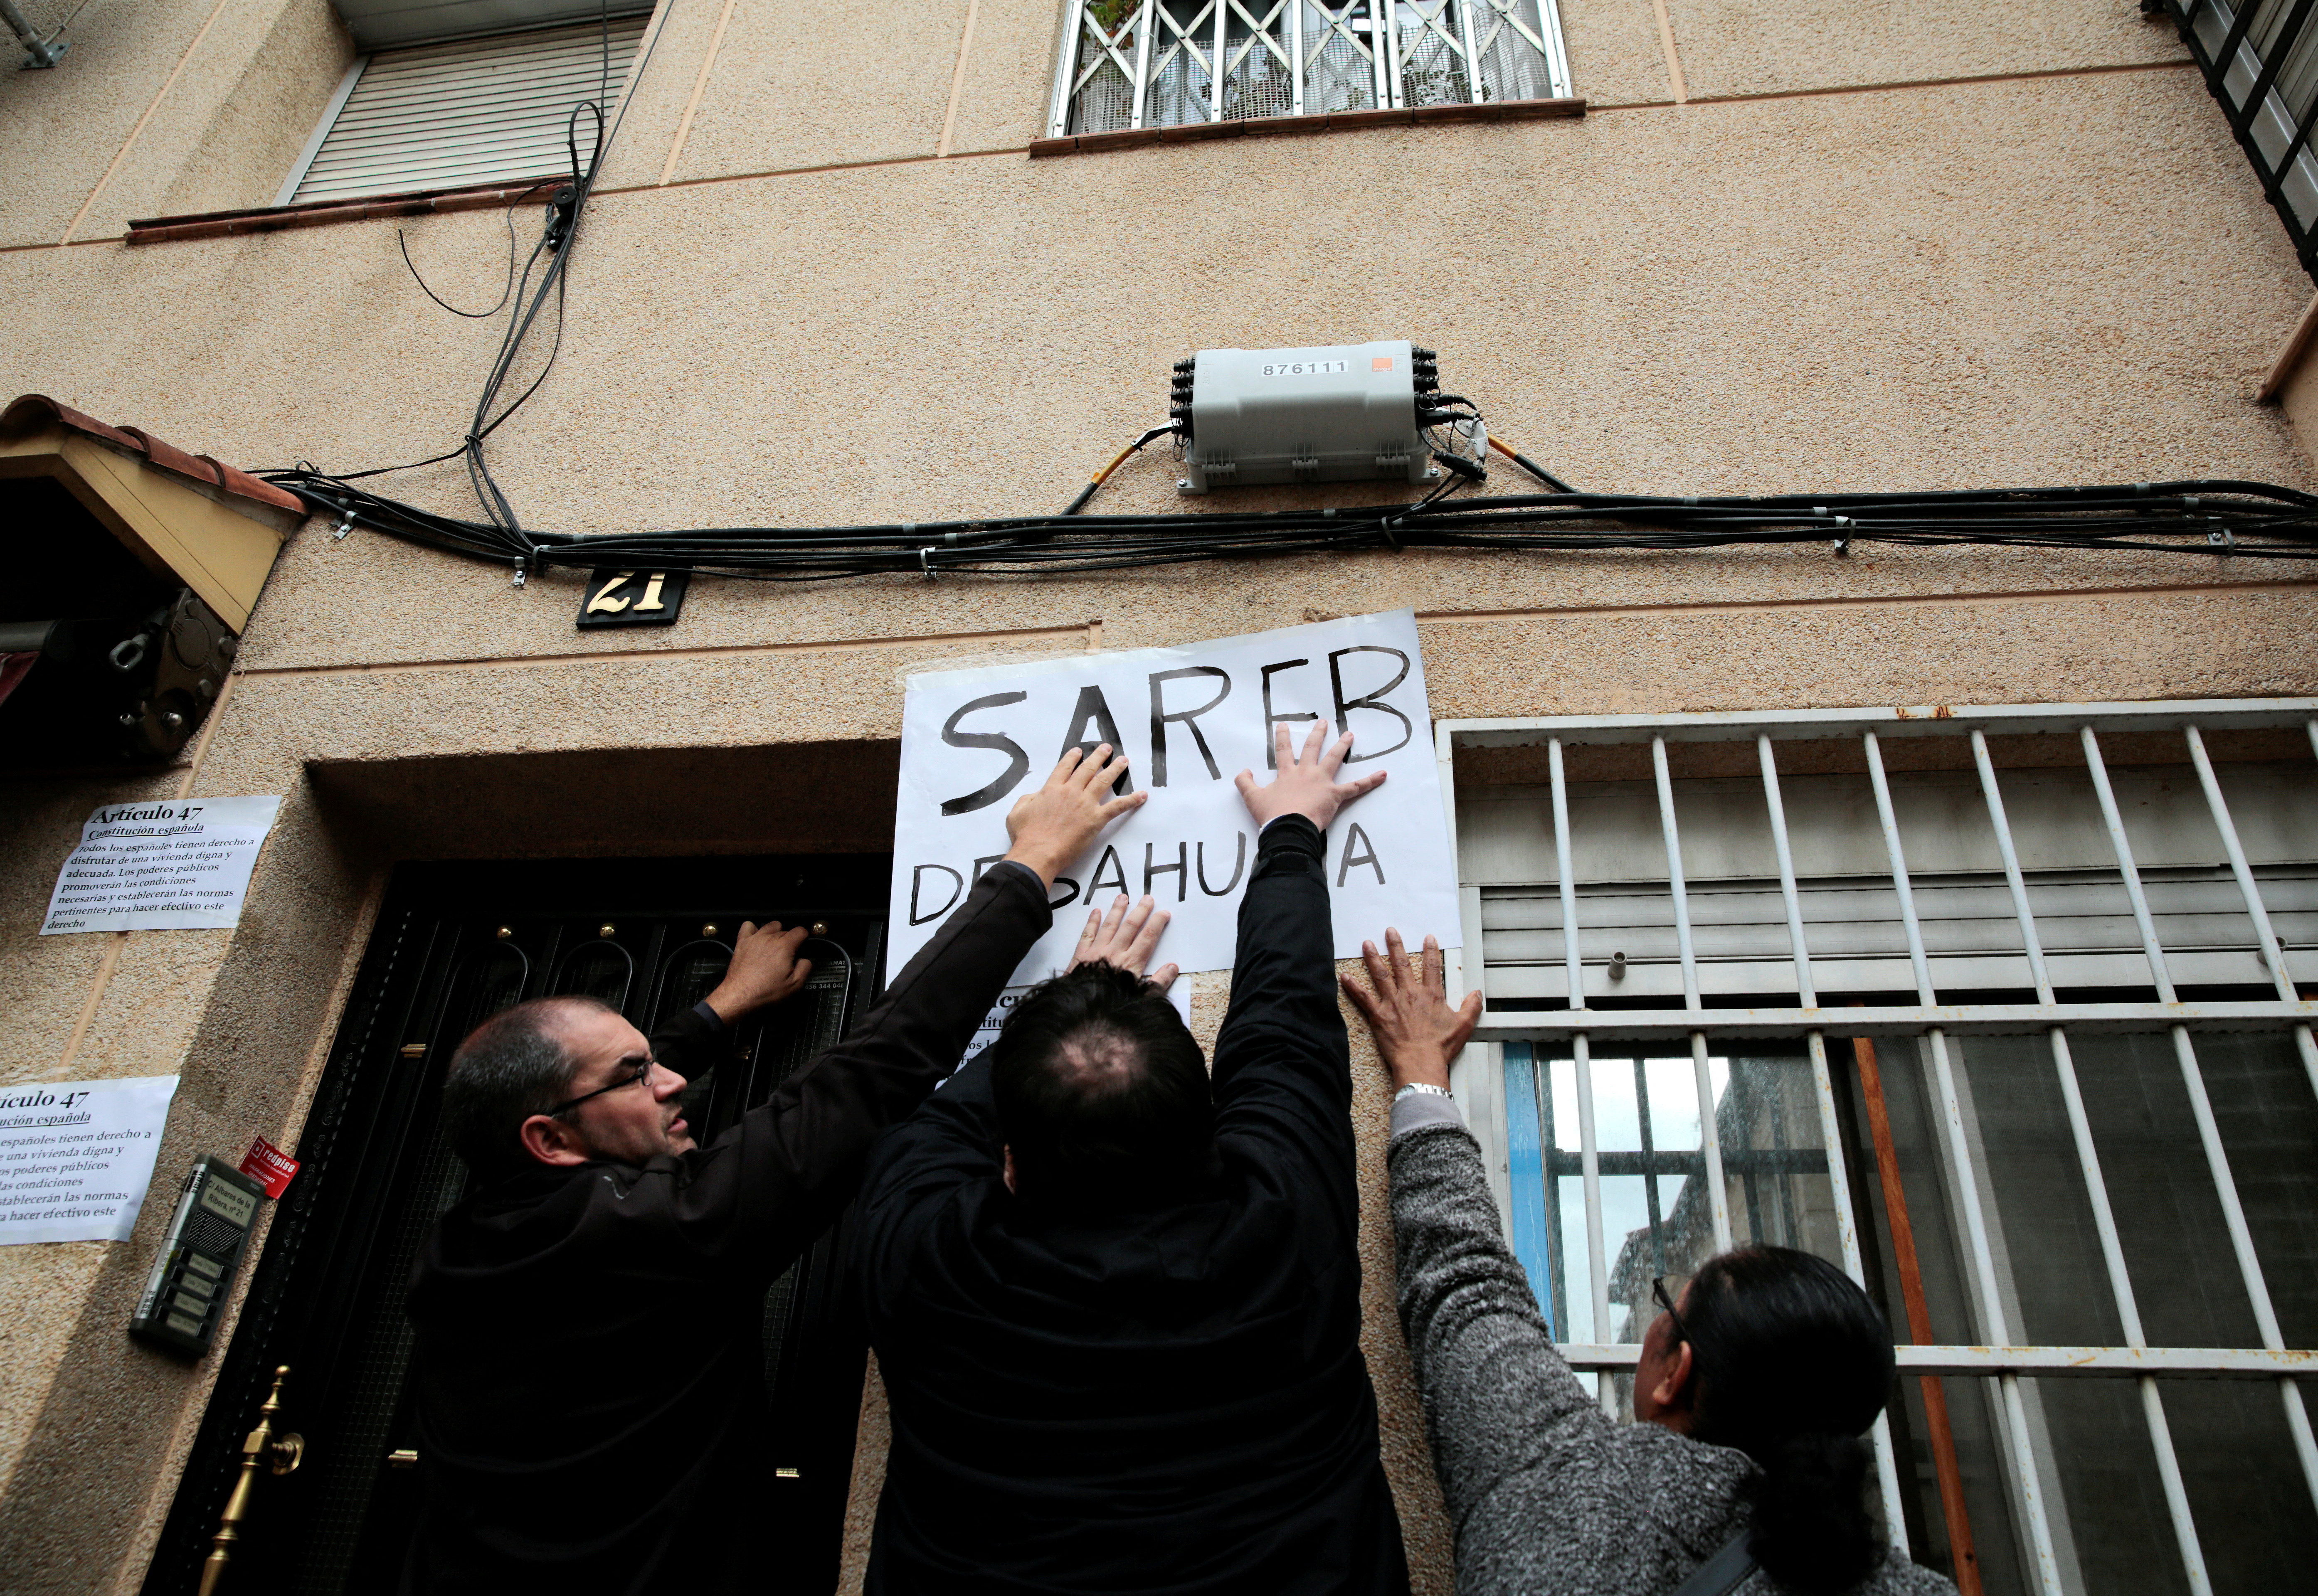 Anti-eviction activists stick a banner reading "Sareb evicts" against a wall as they wait for an eviction in Madrid